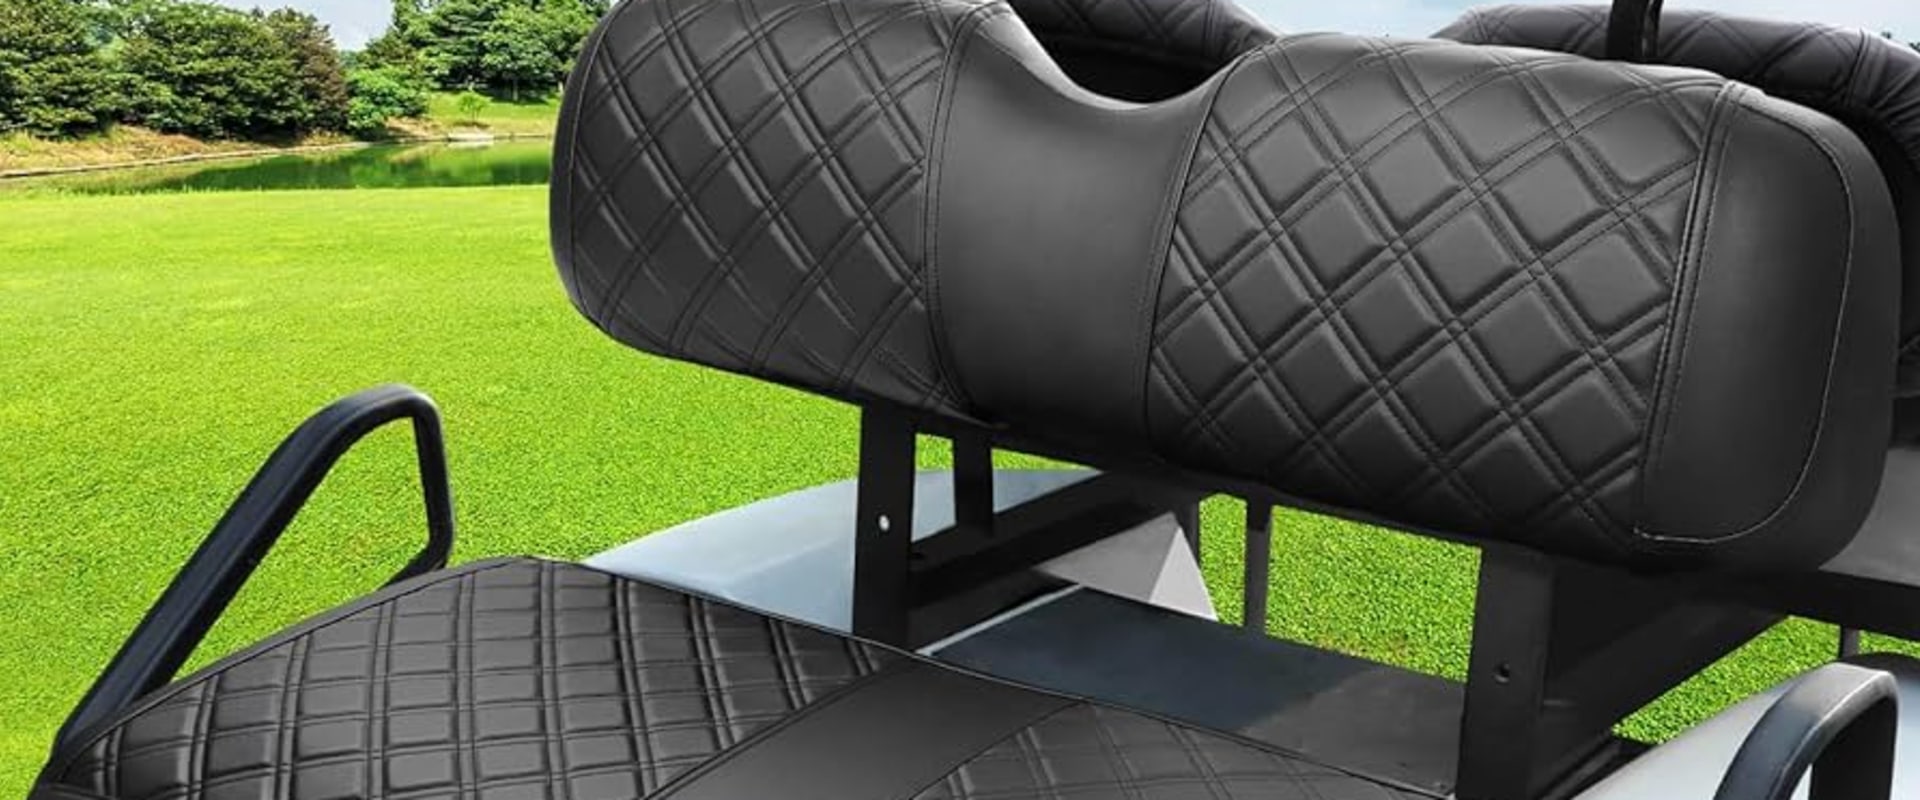 Upcoming Trends in Designer Golf Cart Seat Covers: A Comprehensive Look